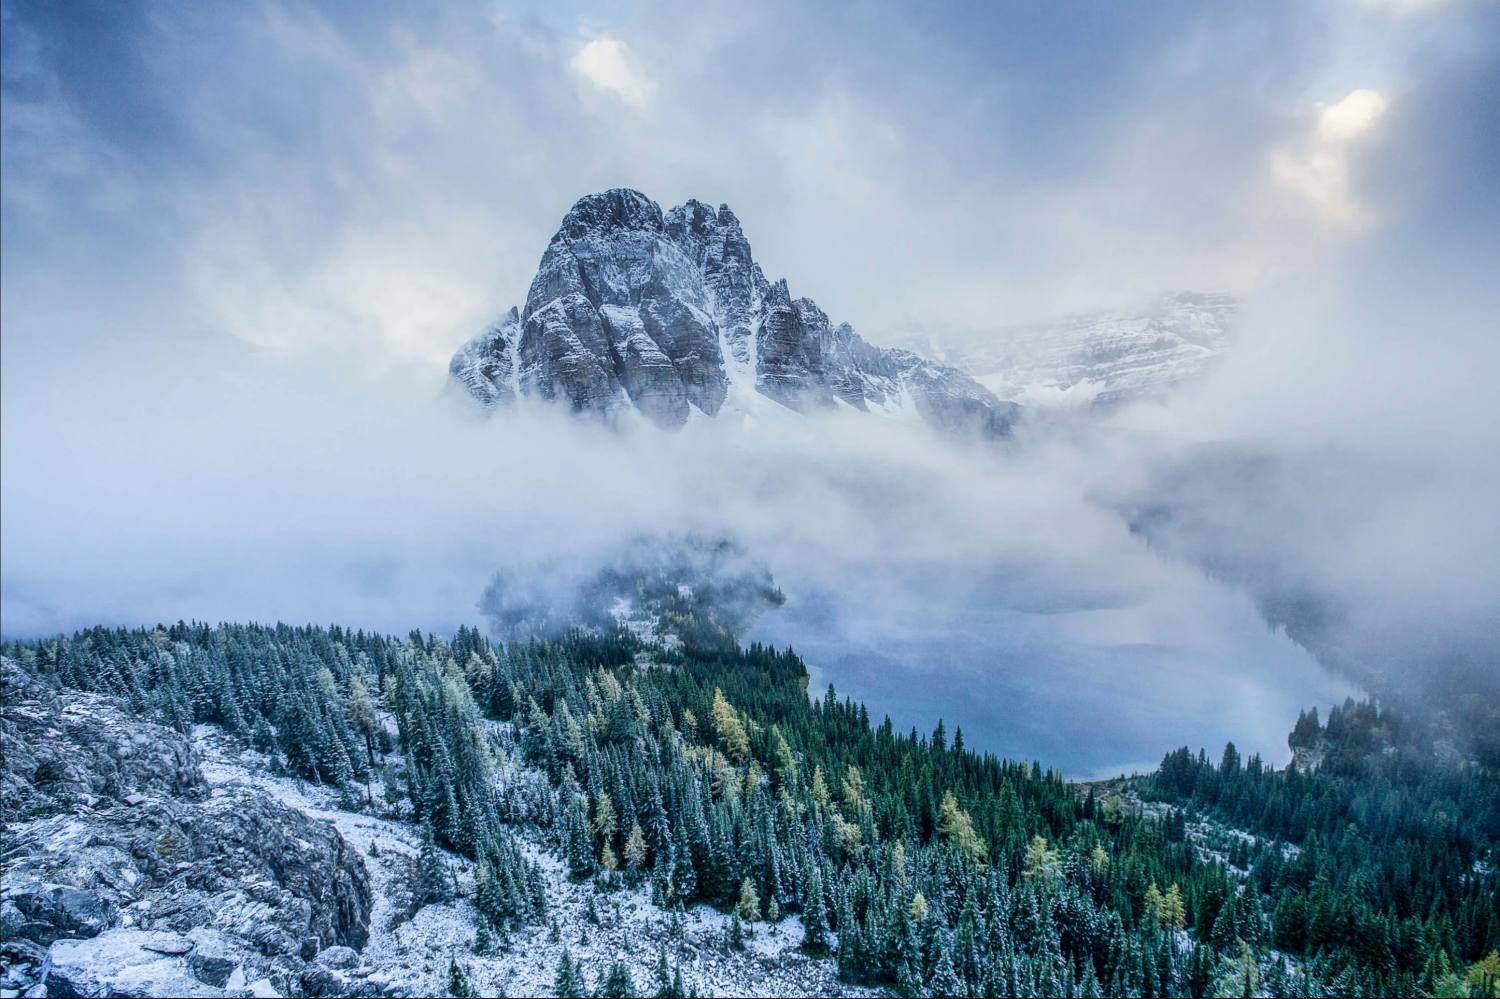 A tall mountain after a snowstorm, with clouds rolling through the valley below